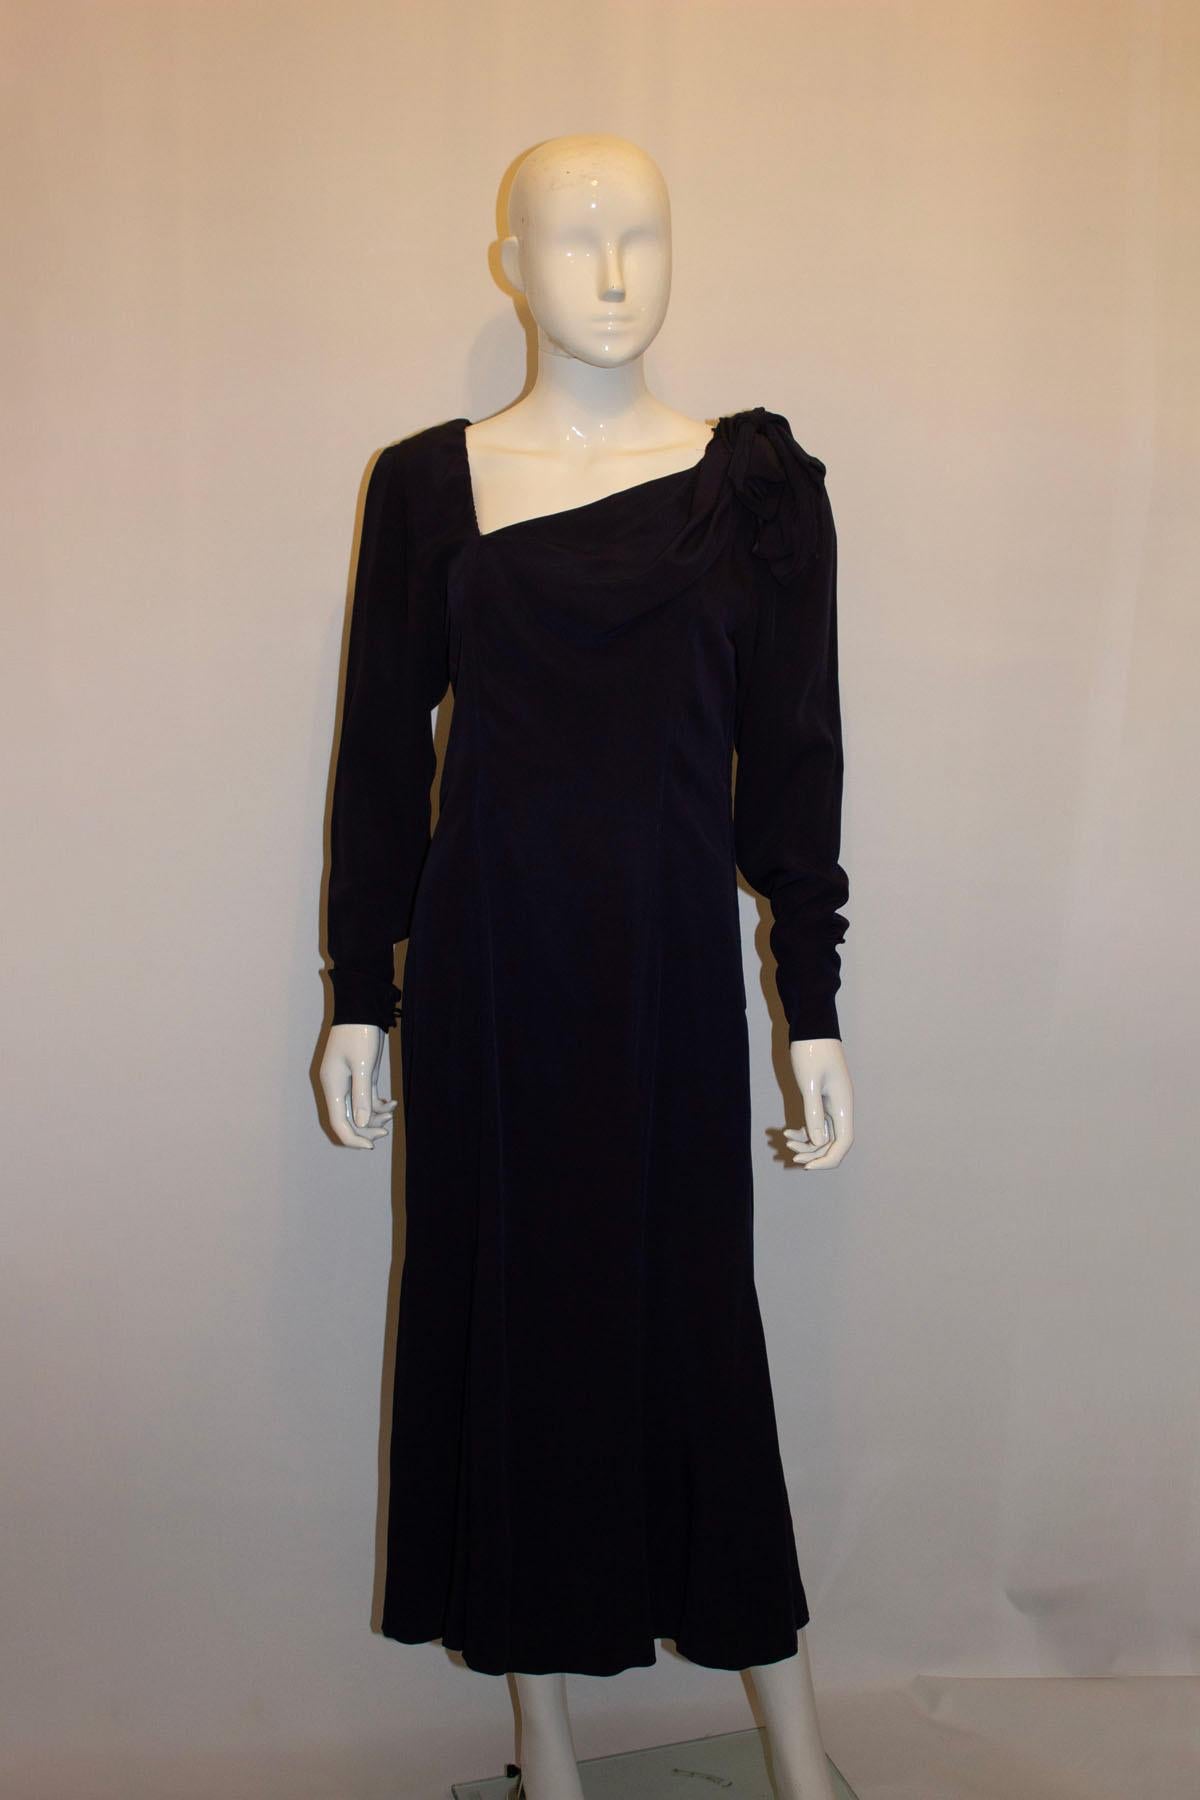 A headturning vintage evening gown by French designer Gaston Jaunet. In a deep blue colour , the dress has an interesting neckline with detail on one shoulder, a side zip opening and button cuffs.
EU size 38 measurements: Bust 38'', length 48''